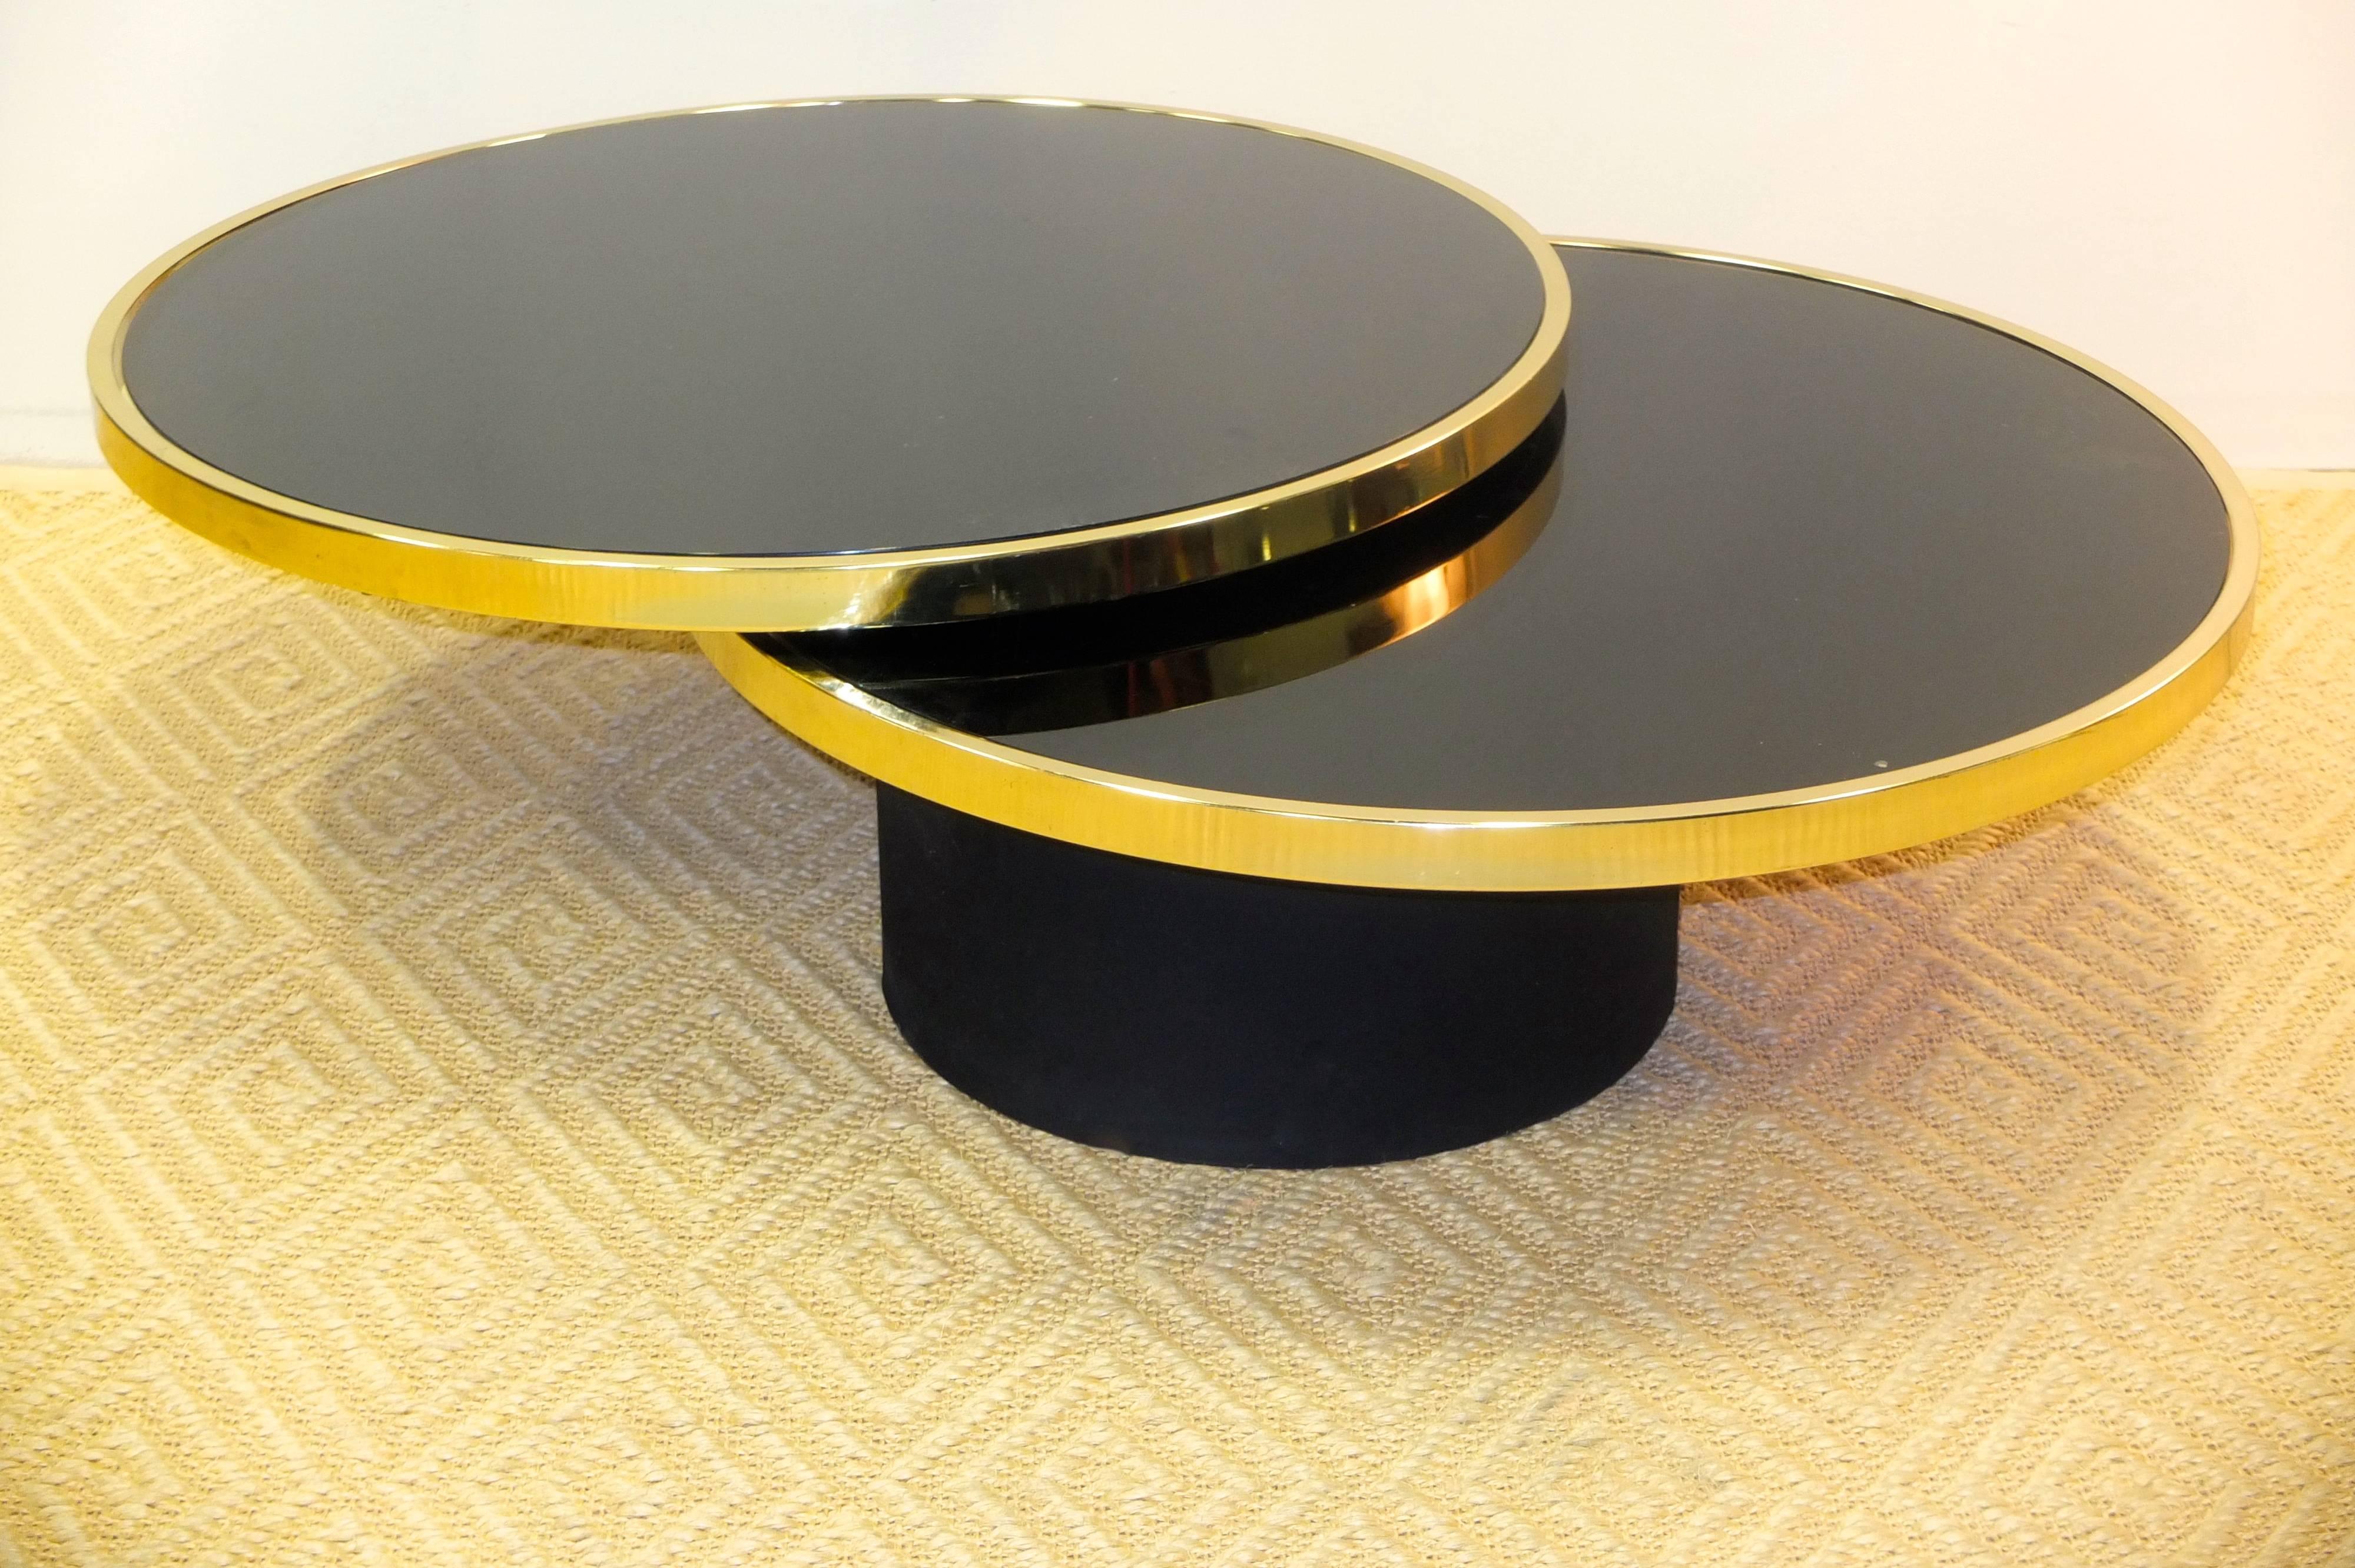 Glamorous and functional round two tier cocktail table the top tier of which rotates smoothly on a clever swivel mechanism.  The base is a drum covered in black suede.  The brass plated double ring frames hold round glass tops which have been tinted